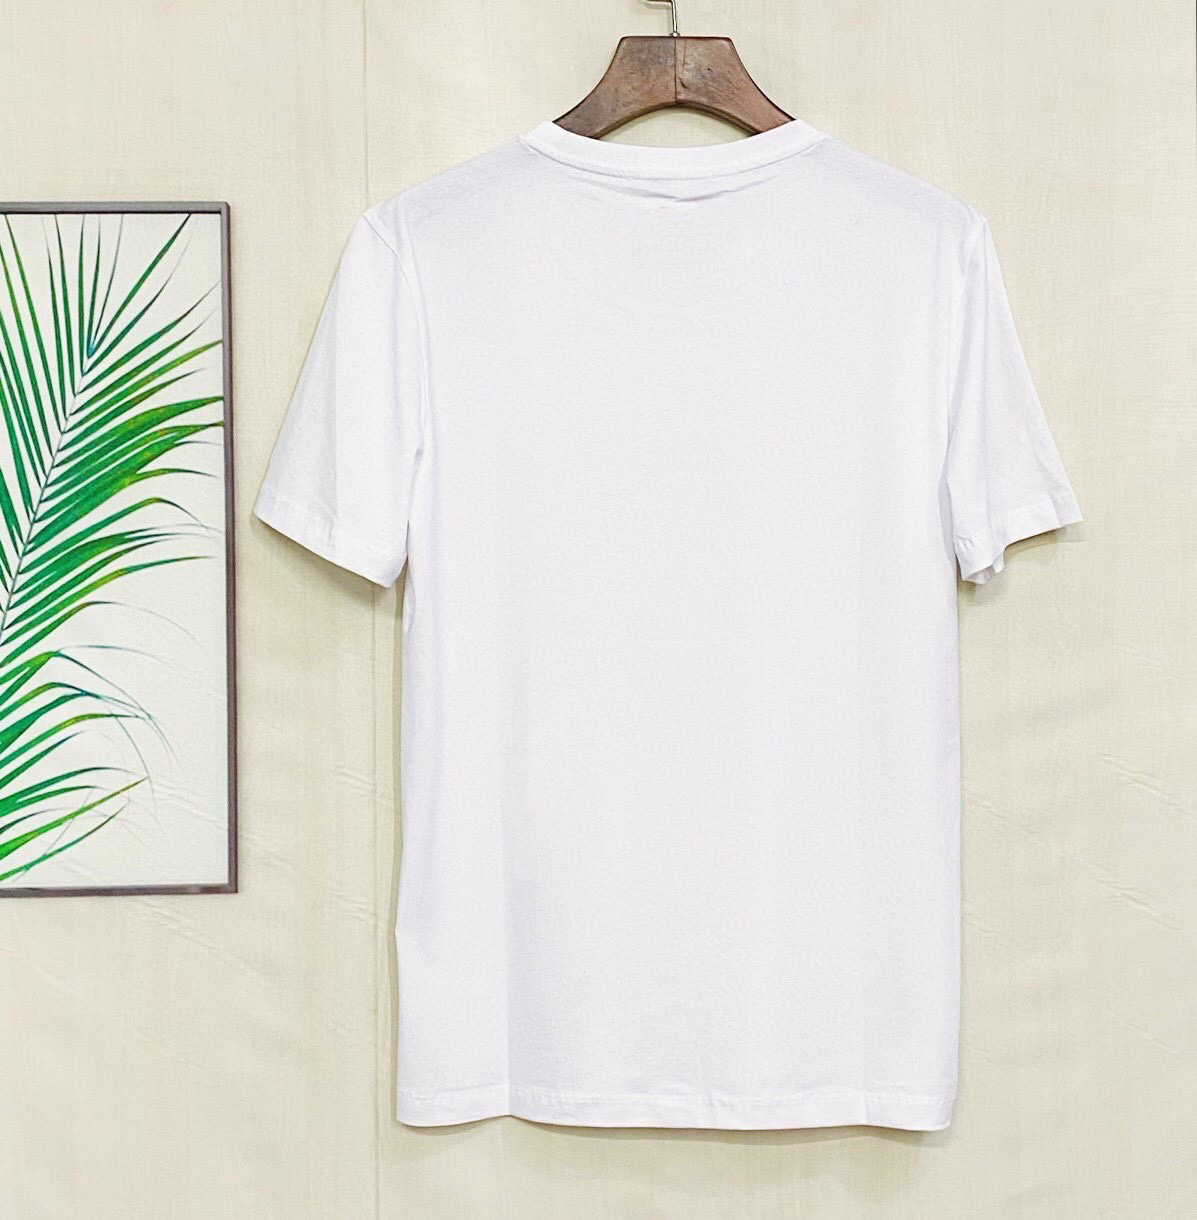 m0ncler Summer 2020 male short sleeve T medaka round neck printed logo in white lettering casual personality